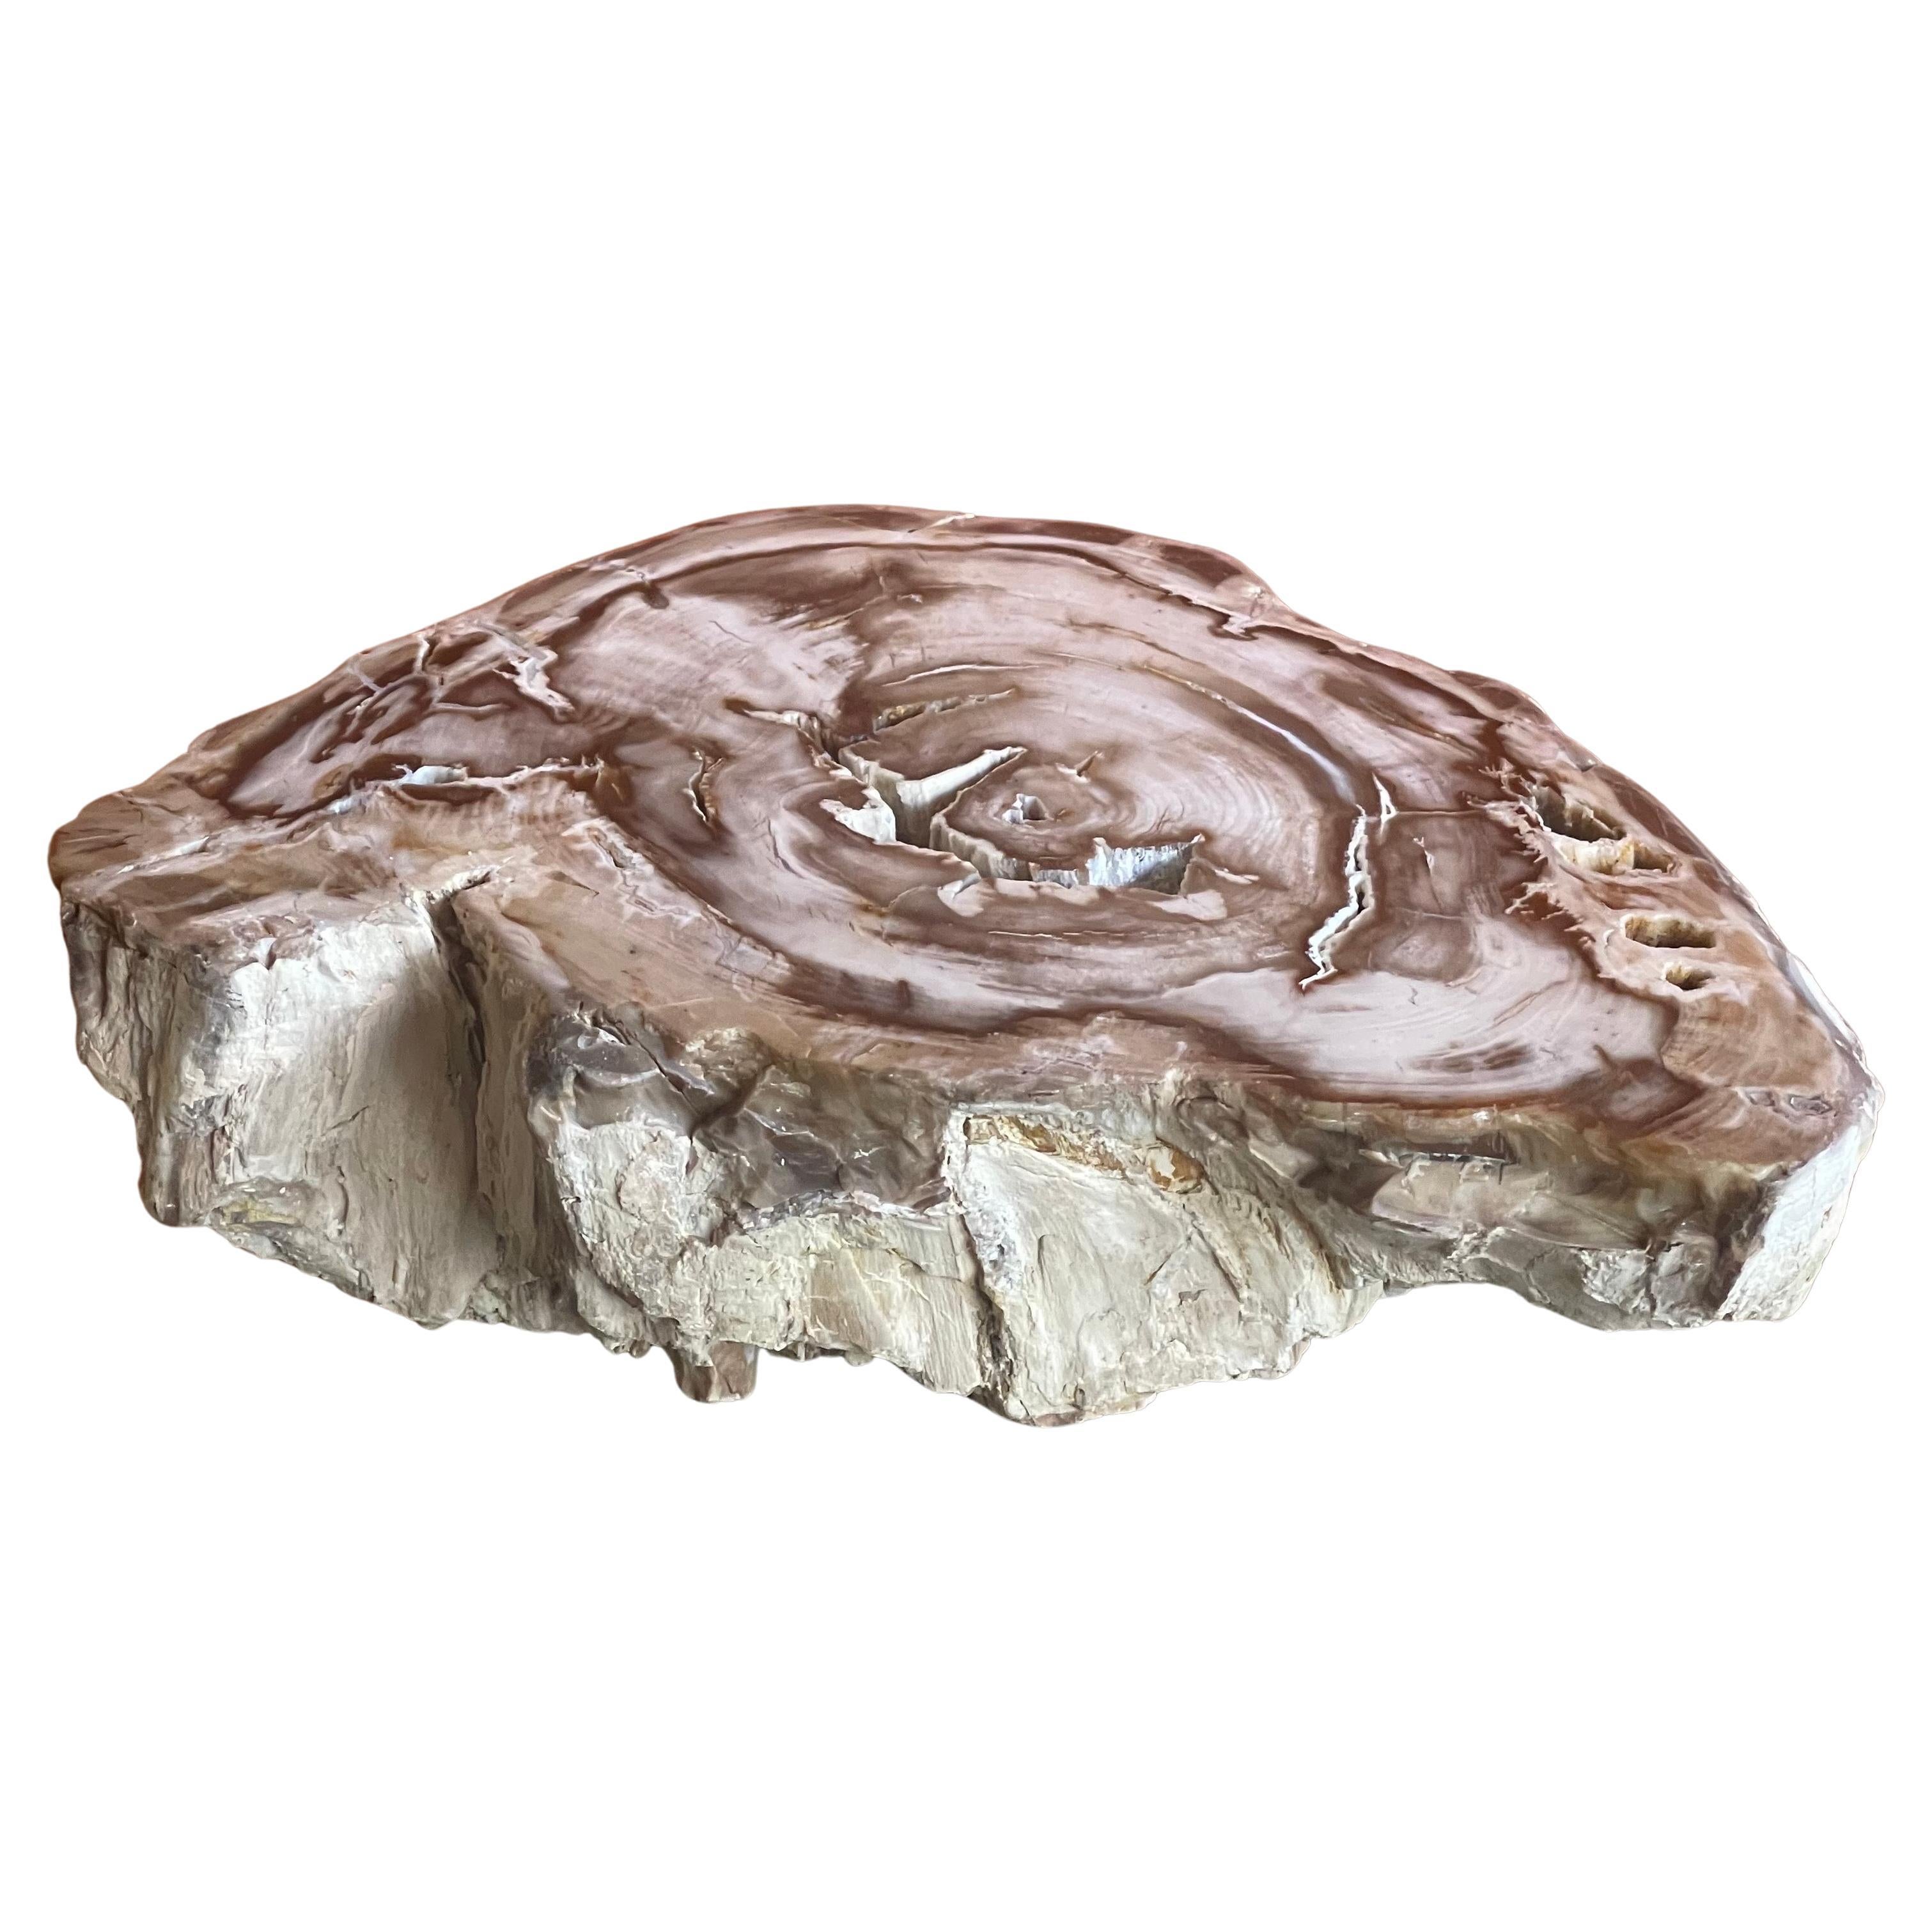 A really nice petrified wood sculpture, circa pre-history. Brightly colored tan, brown and cream tones with naturally formed patterns caused by fossilization over millions of years. Finished with a highly polished surface, the exterior edges